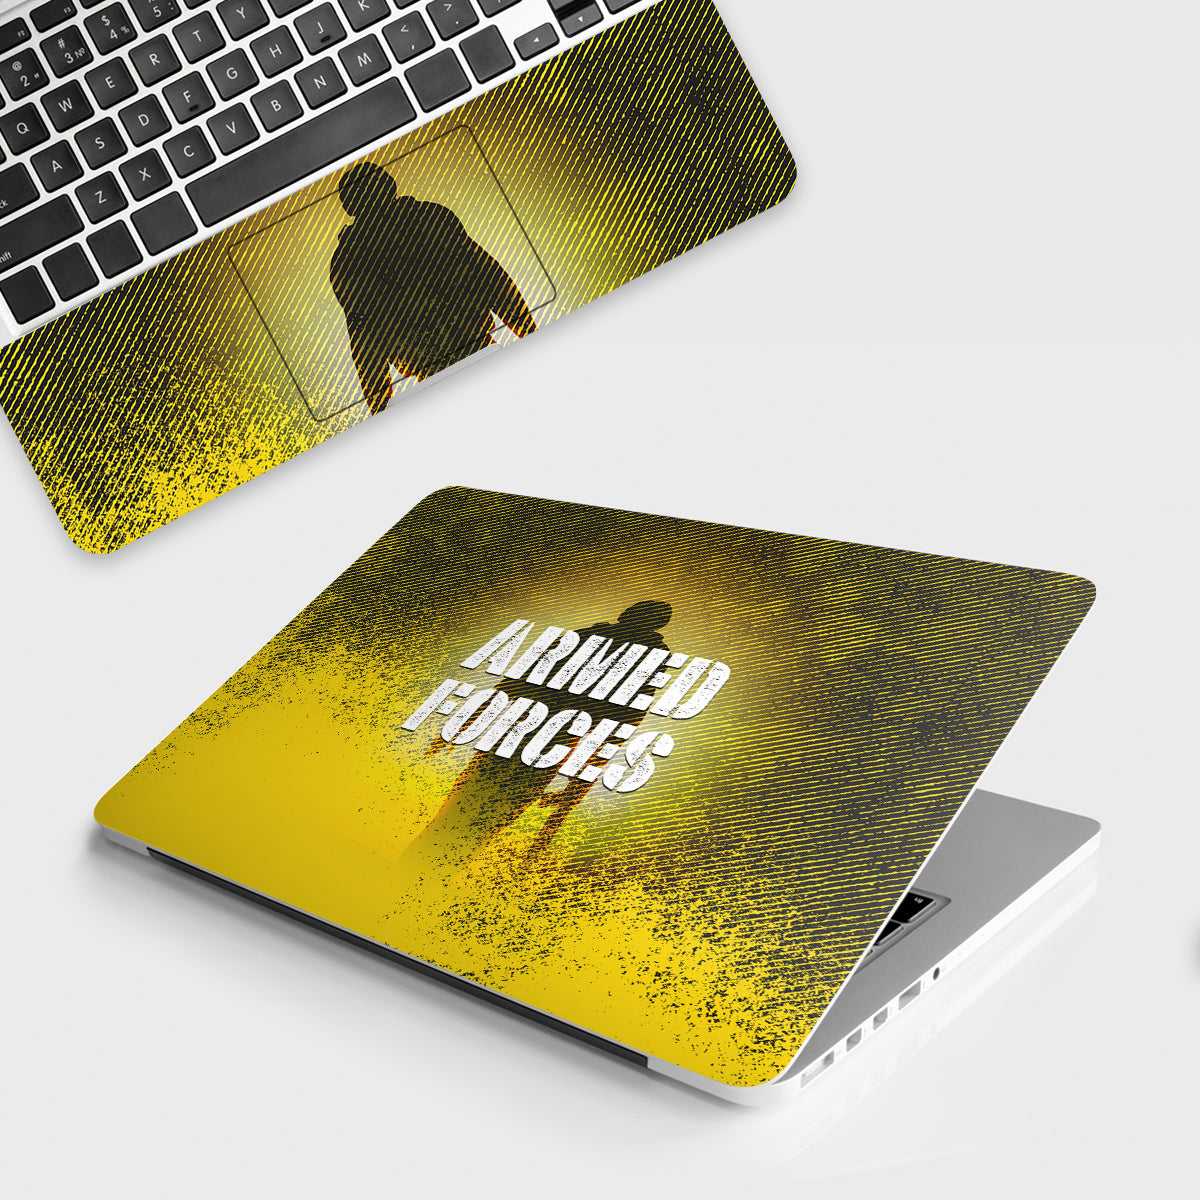 Fomo Store Laptop Skins Miscellaneous Armed Force